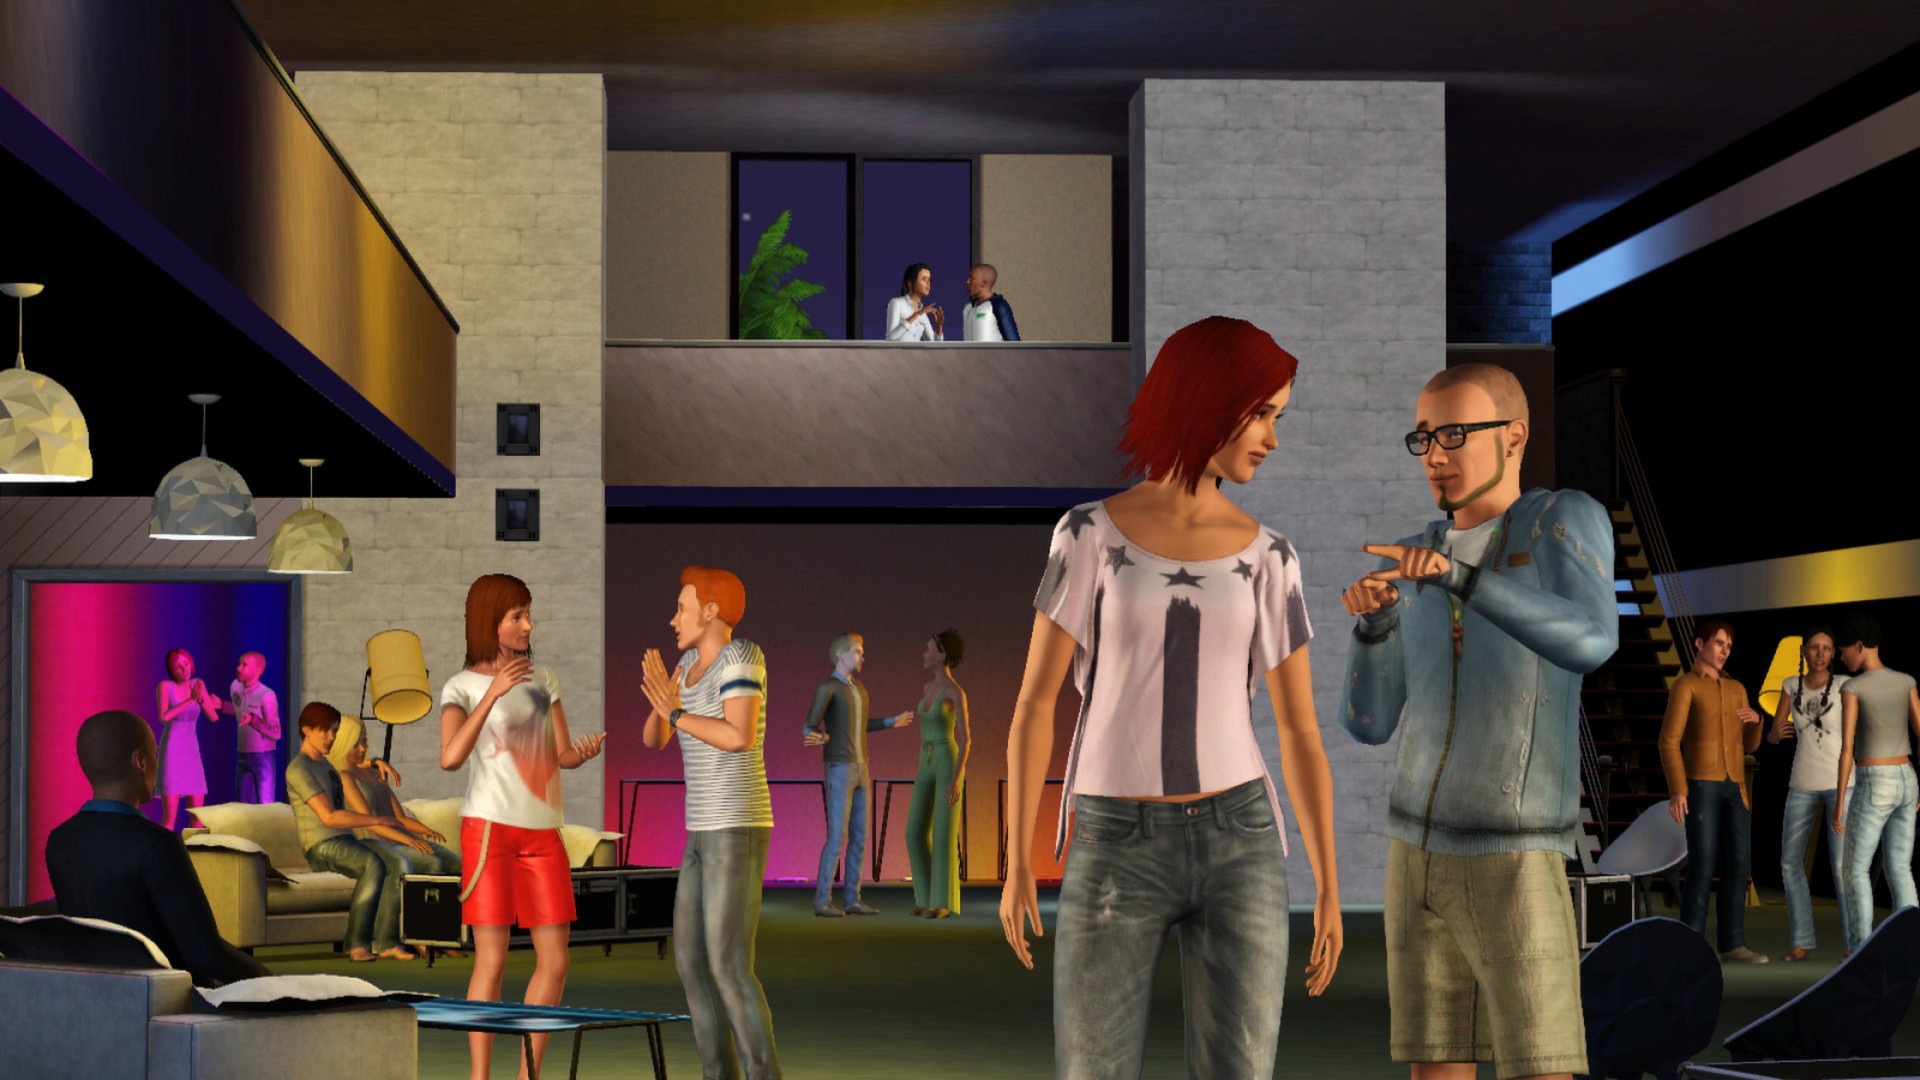 sims 3 world adventures patch level